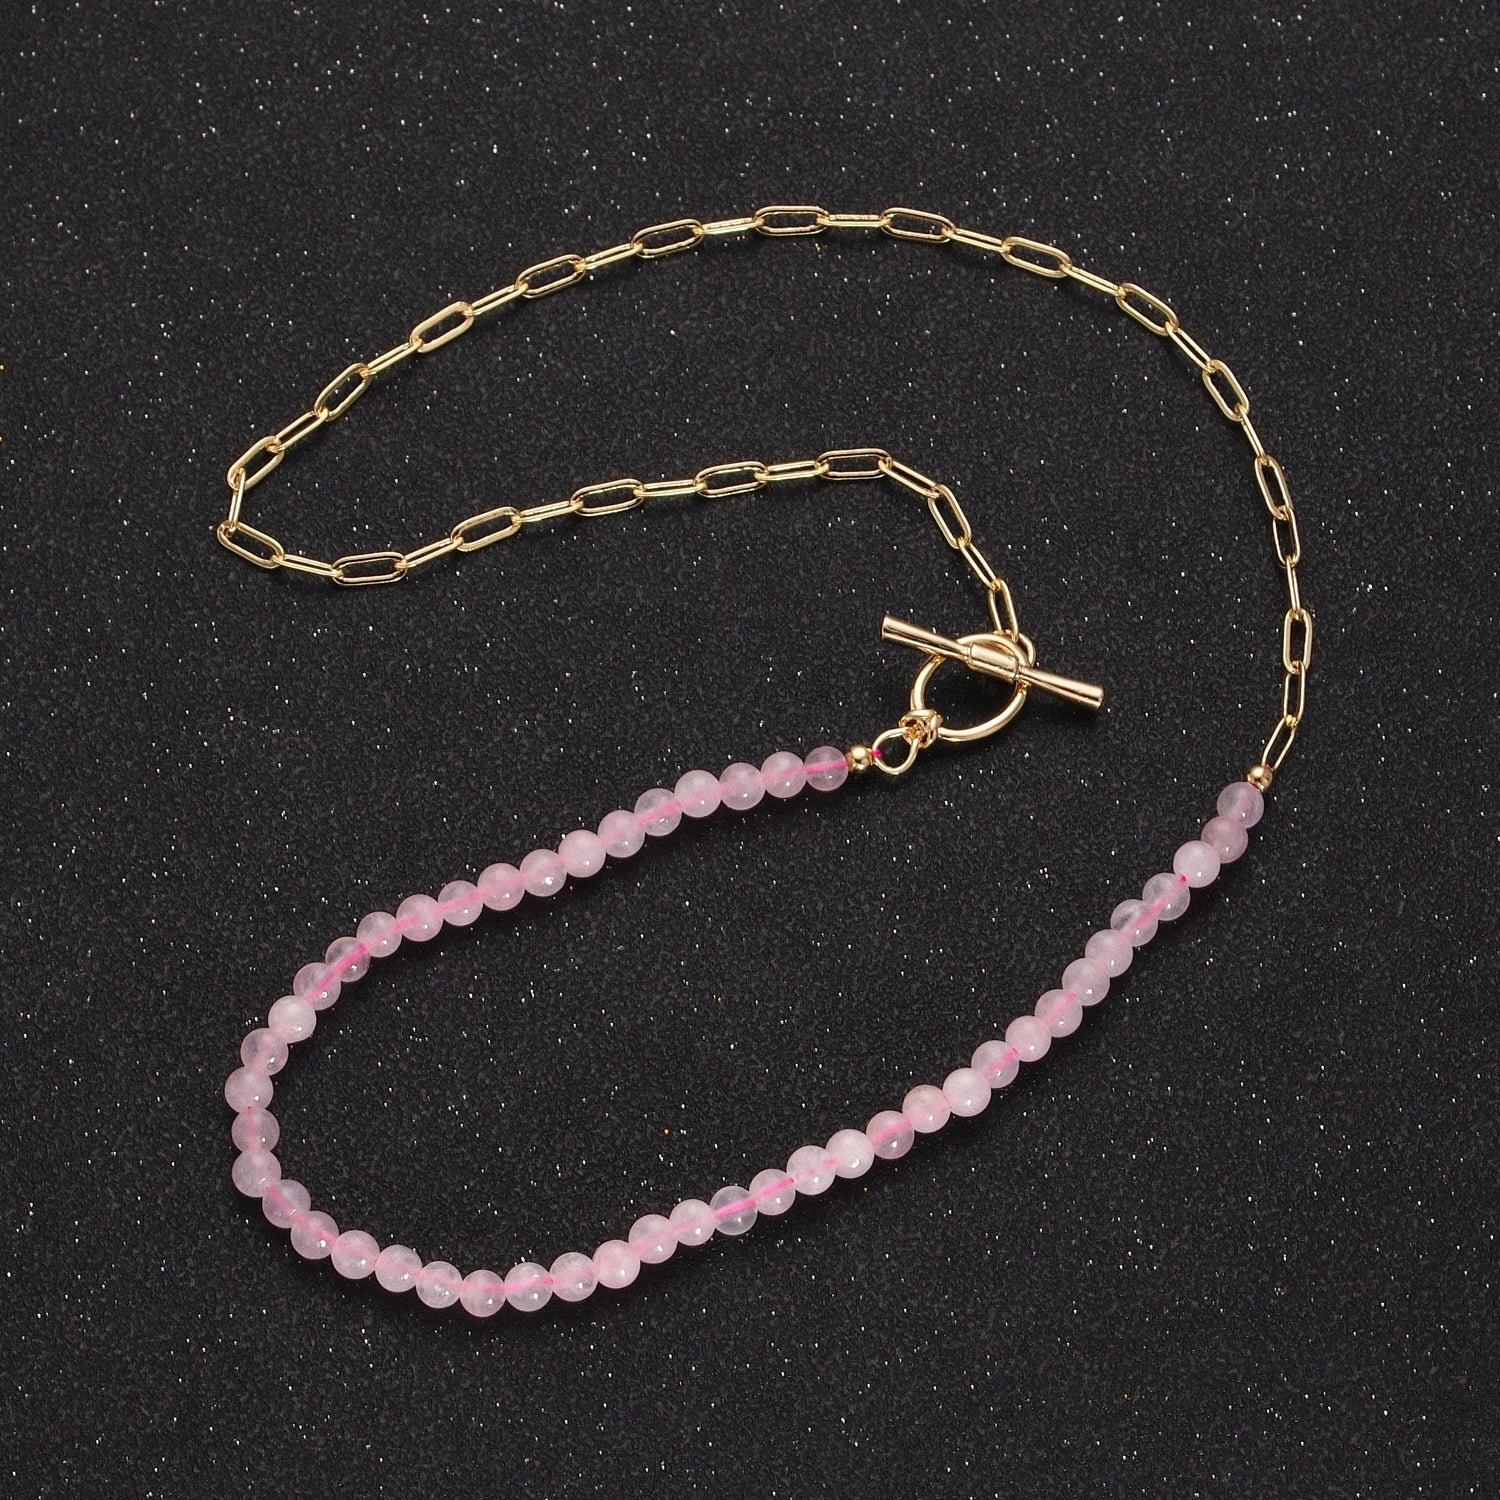 Dainty Half Bead Half Link Chain Necklace, 24k Gold Filled Paperclip Chain with Pink Quartz Necklace with Oval Toggle Clasps WA-1019 - DLUXCA